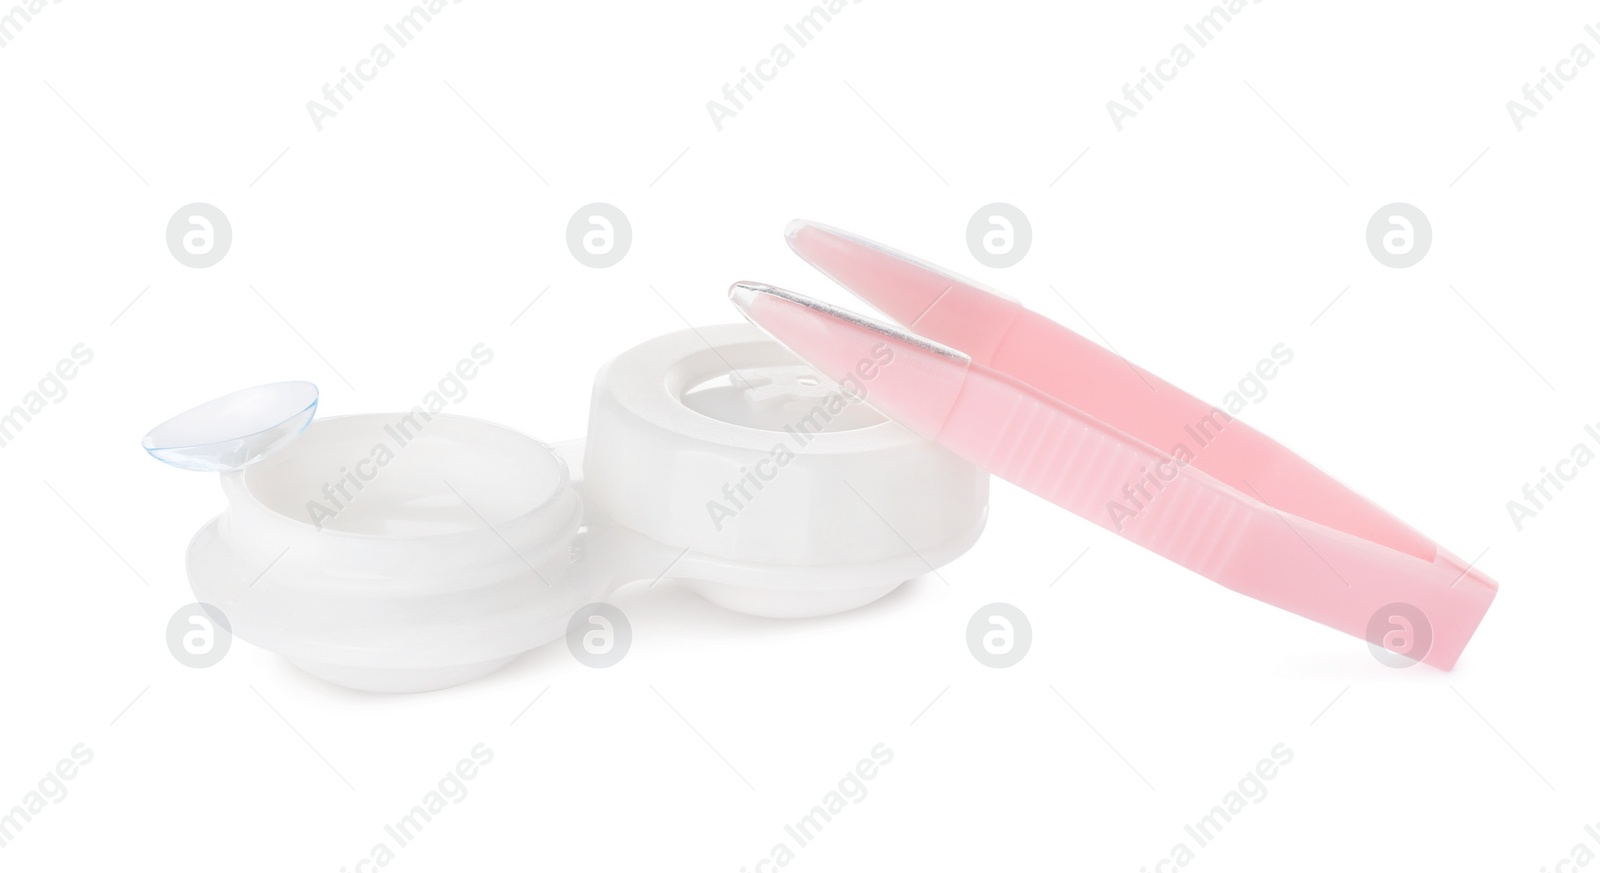 Photo of Case with contact lenses and tweezers on white background